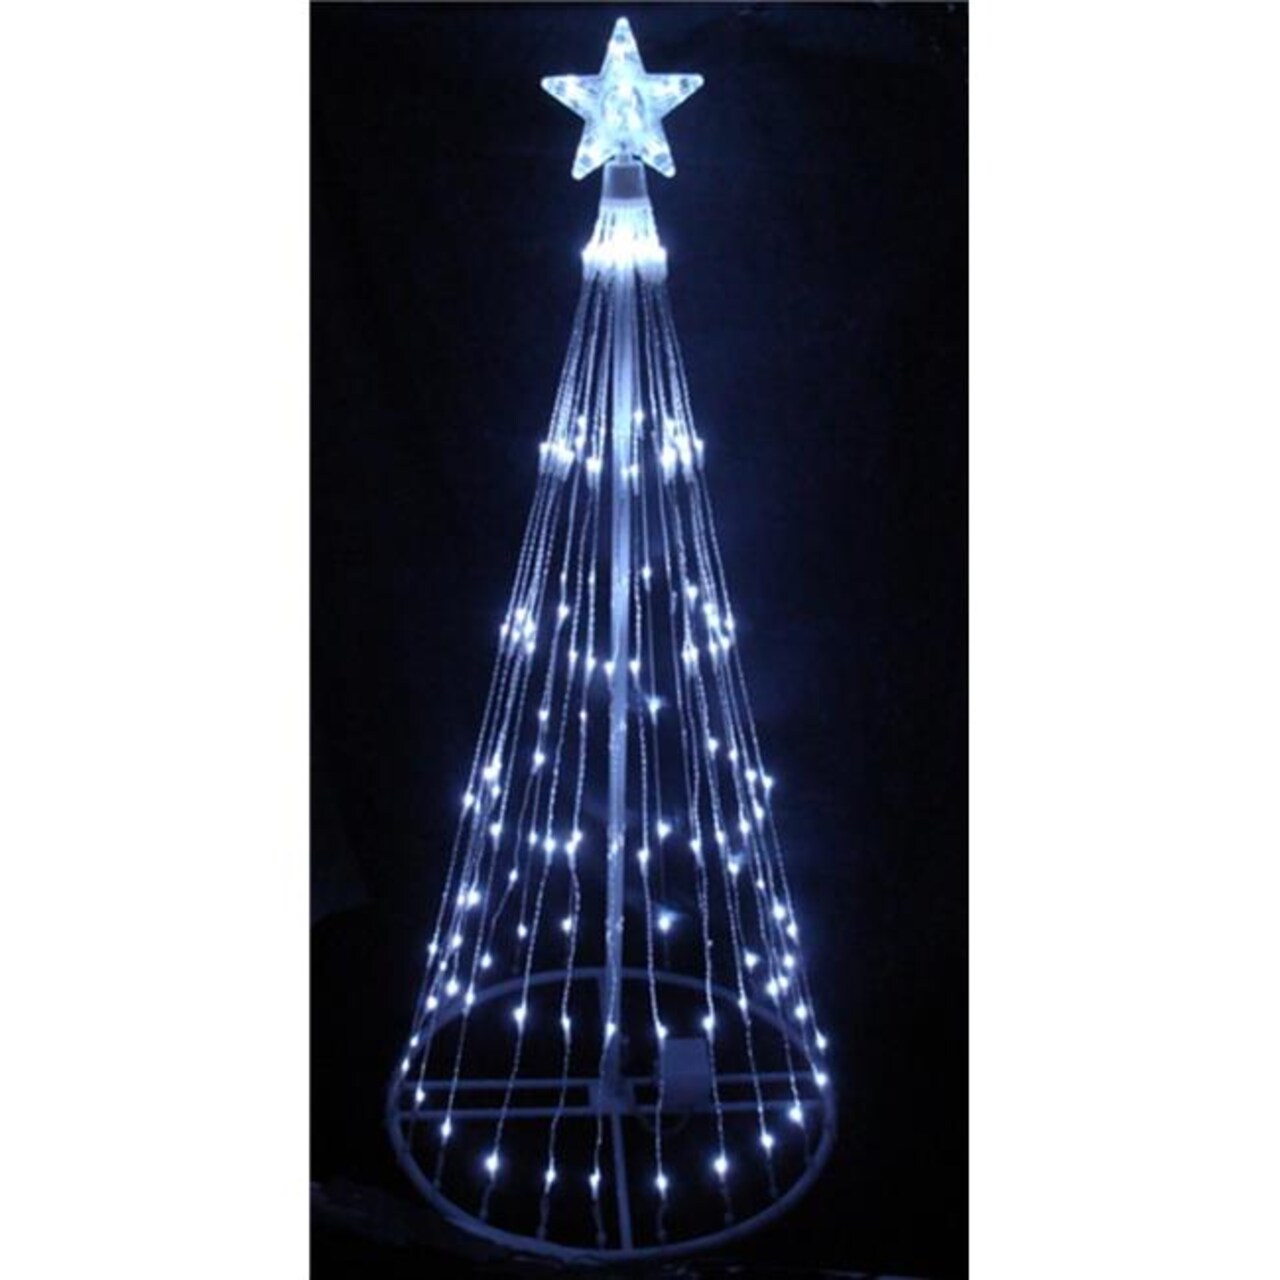 Northlight 32912670 4 ft. LED Lighted Show Cone Christmas Tree Outdoor Decoration, Polar White